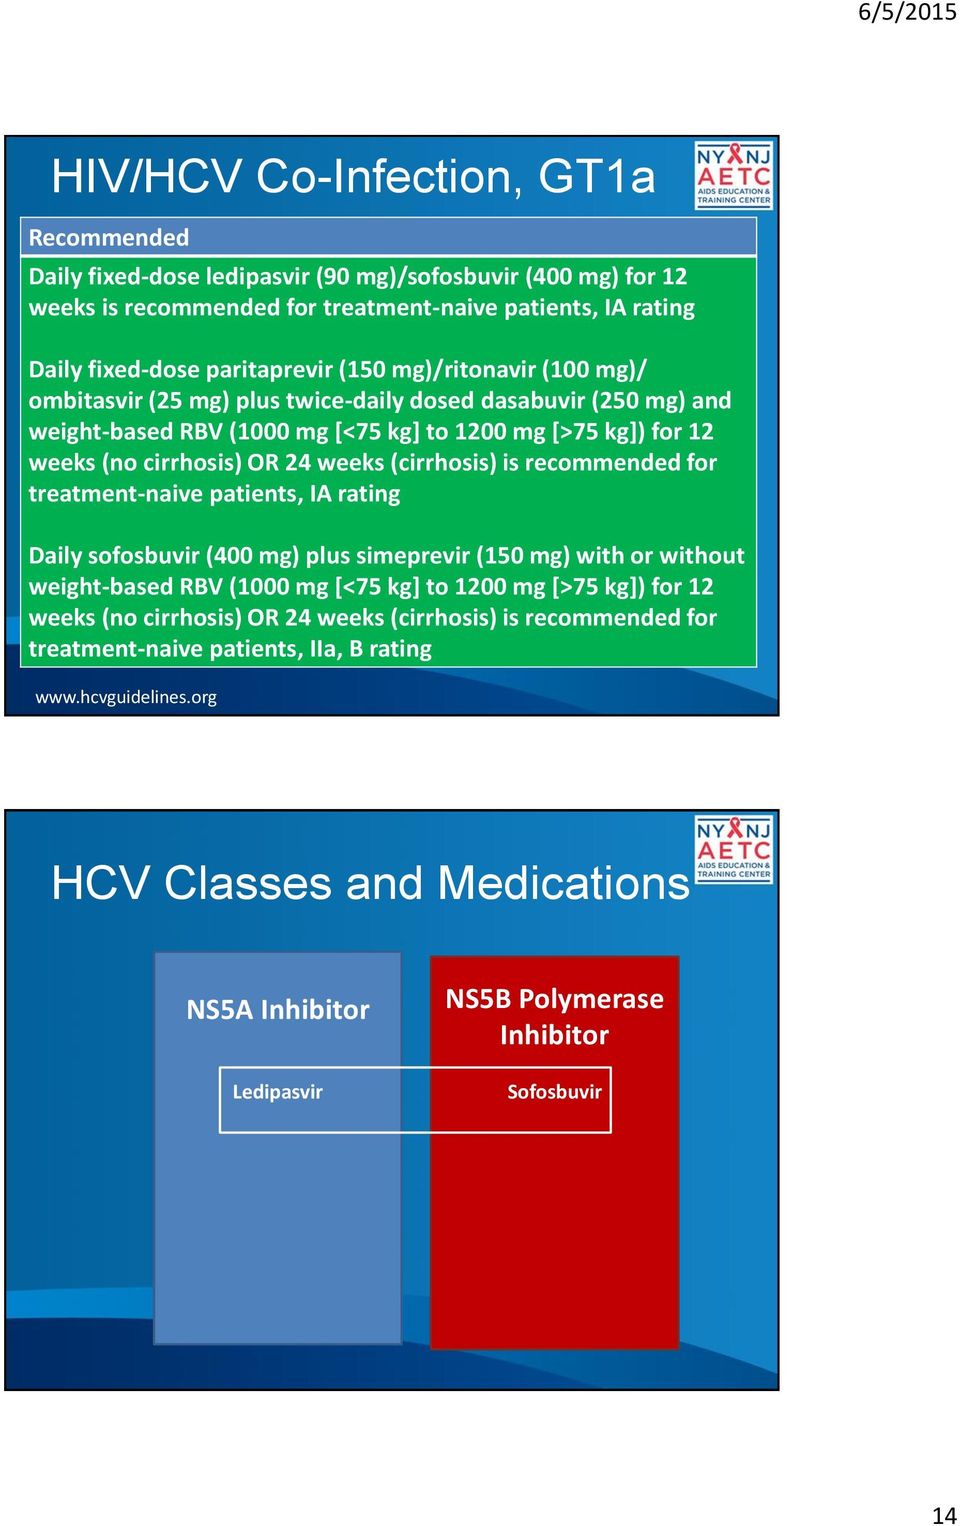 recommended for treatment-naive patients, IA rating Daily sofosbuvir (400 mg) plus simeprevir (150 mg) with or without weight-based RBV (1000 mg [<75 kg] to 1200 mg [>75 kg]) for 12 weeks (no